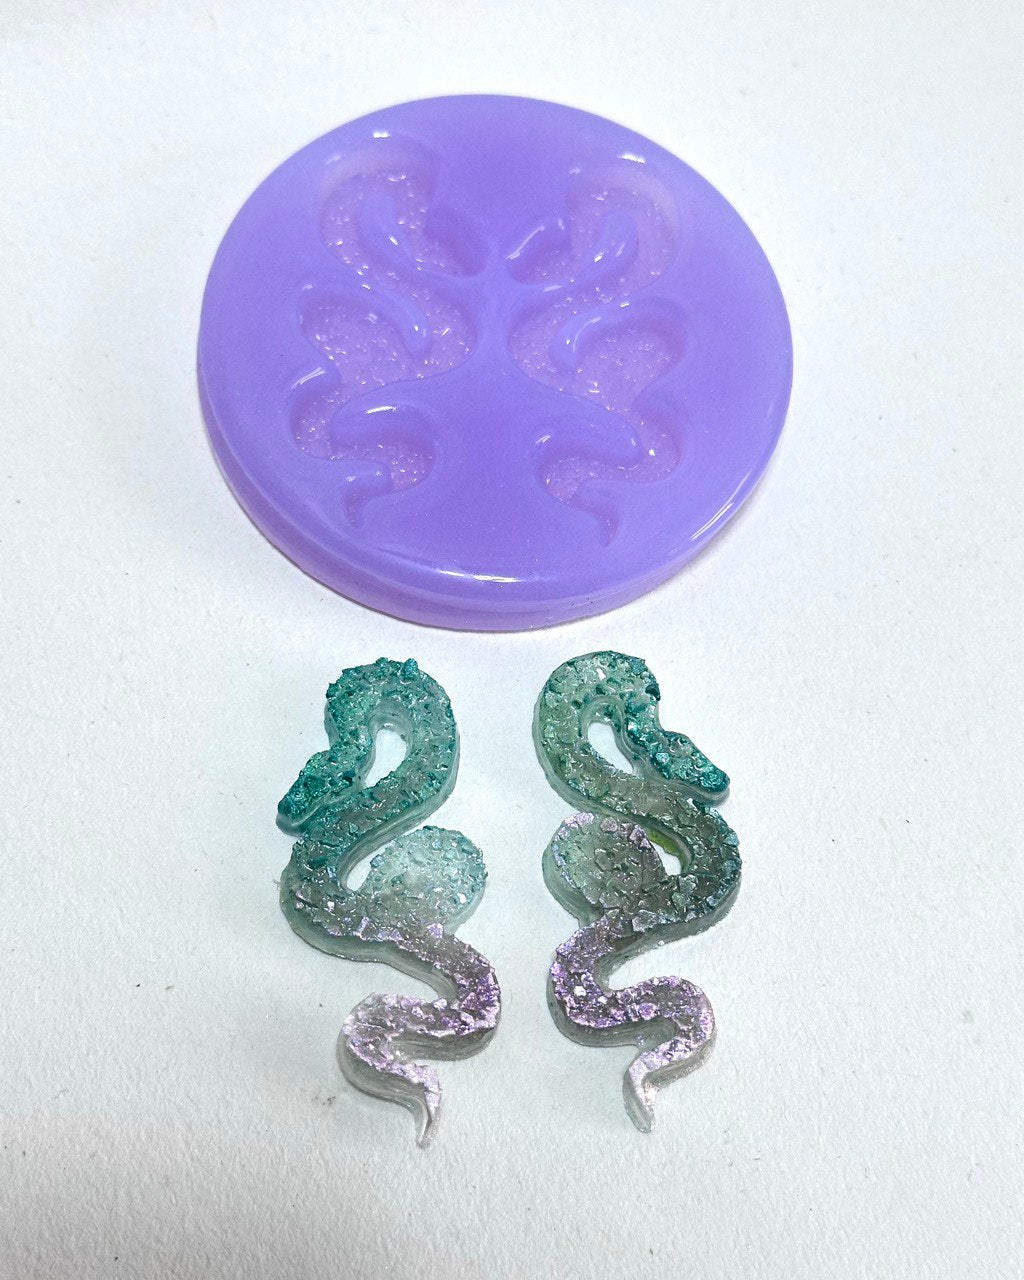 Set of 2 Crystal Snake Silicone Molds